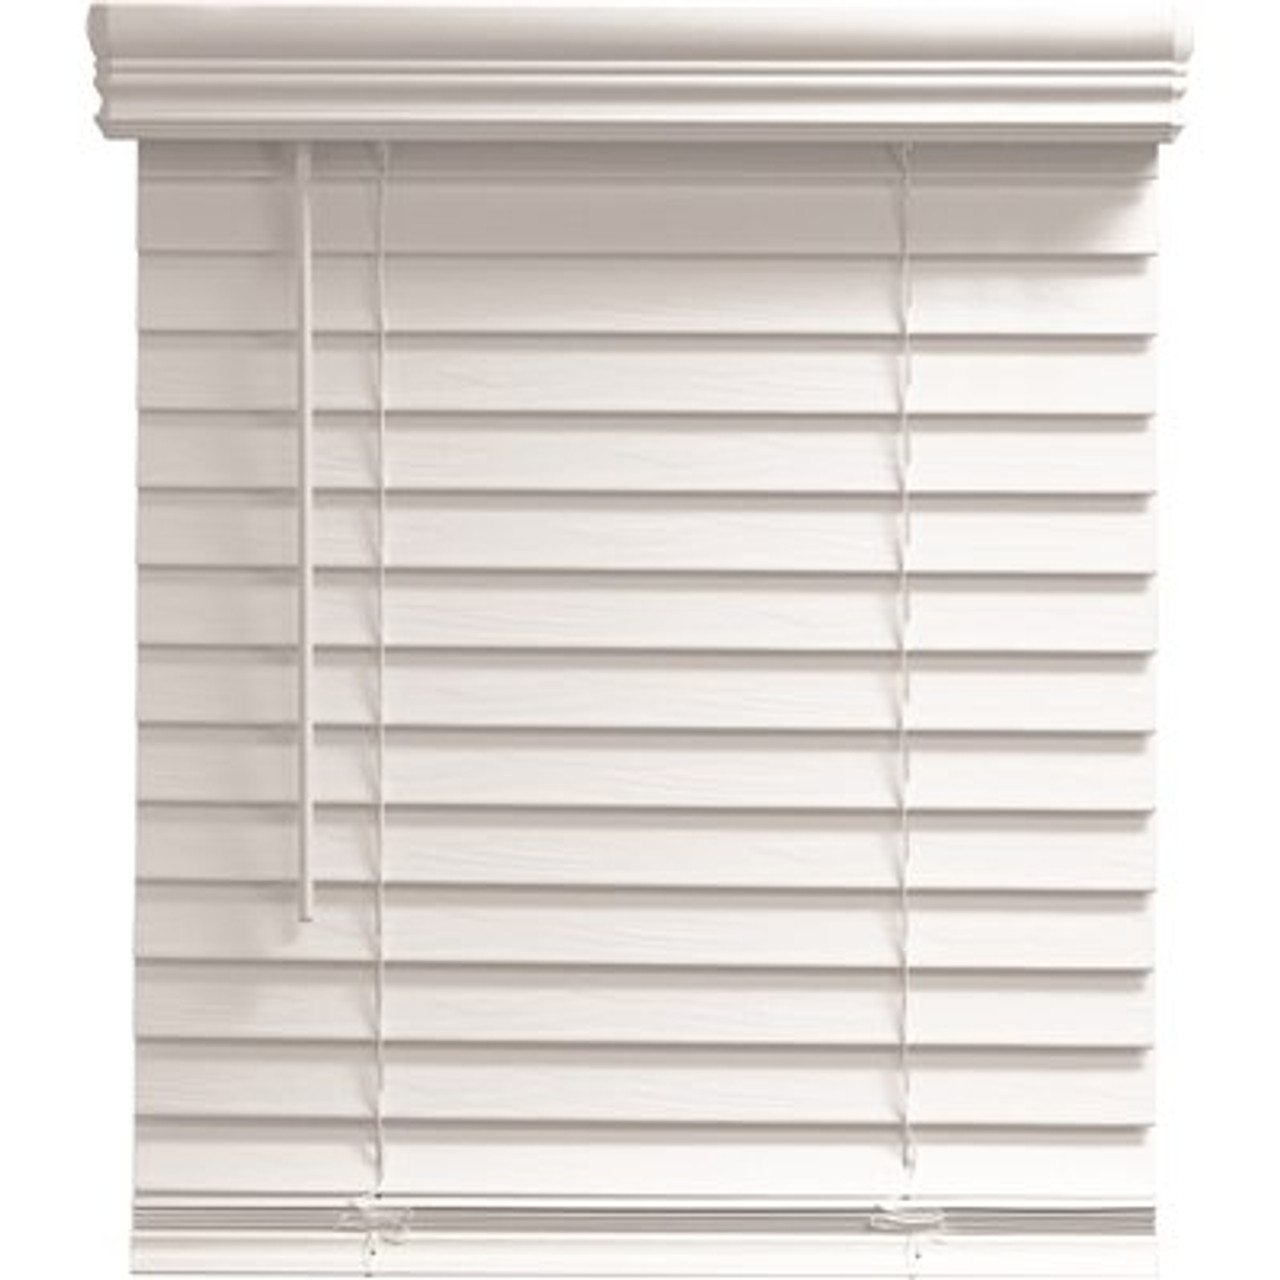 Champion TruTouch 29x72" Cordless 2" Faux Wood Blind White